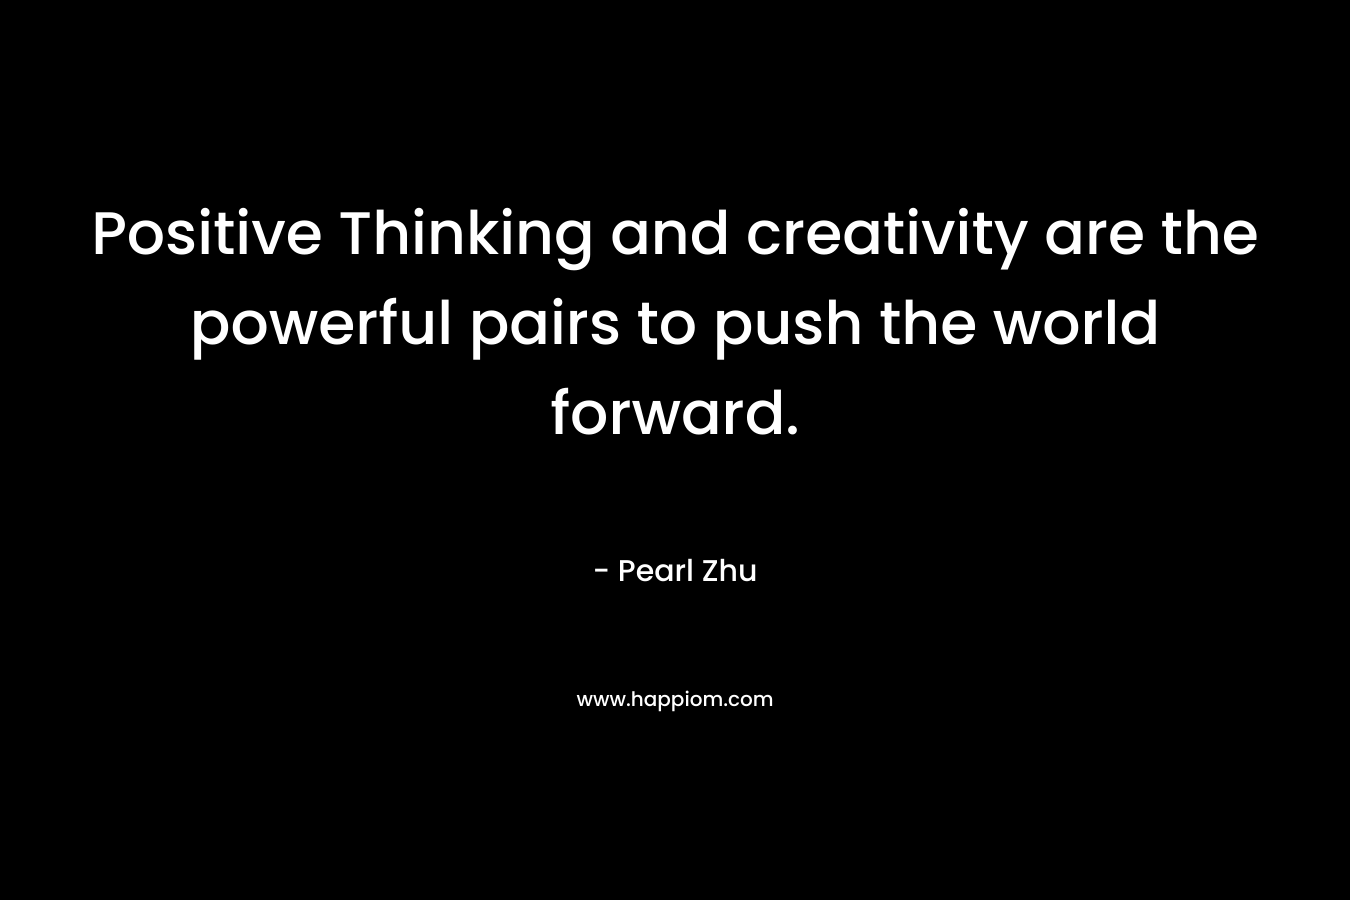 Positive Thinking and creativity are the powerful pairs to push the world forward. – Pearl Zhu